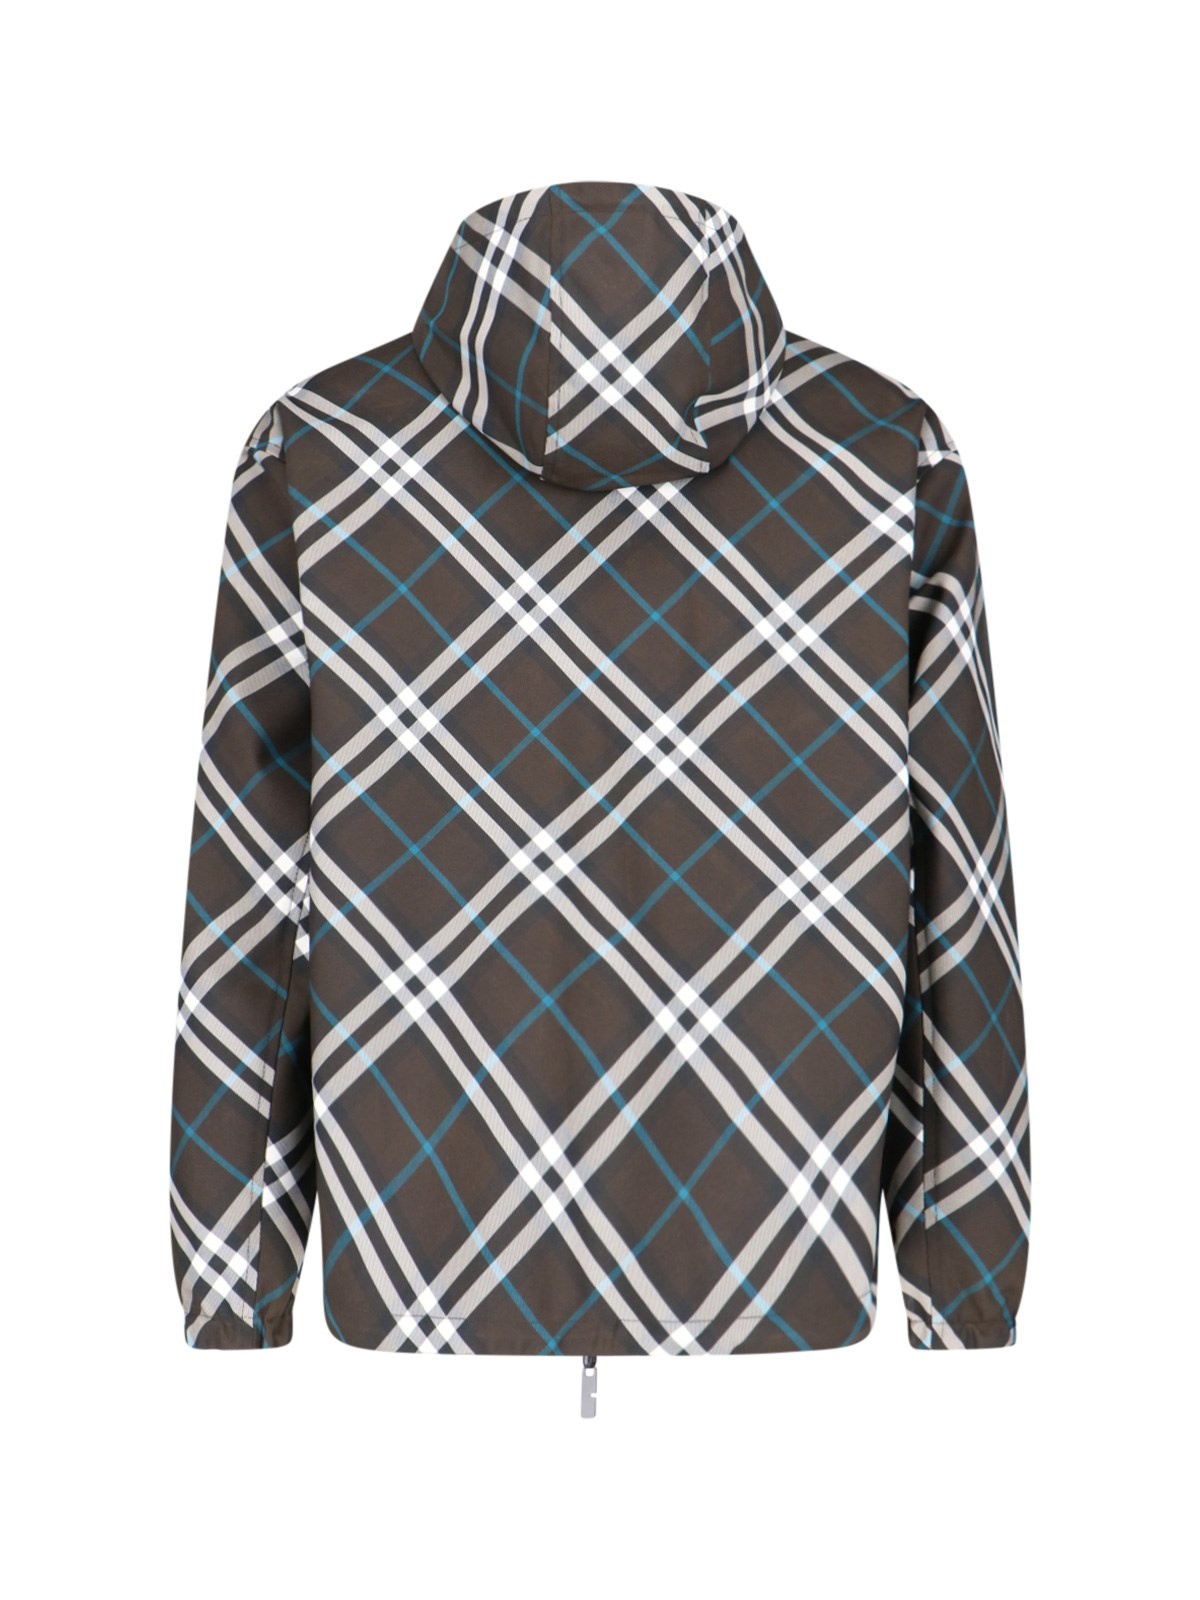 "CHECK" REVERSIBLE TECHNICAL JACKET - 2